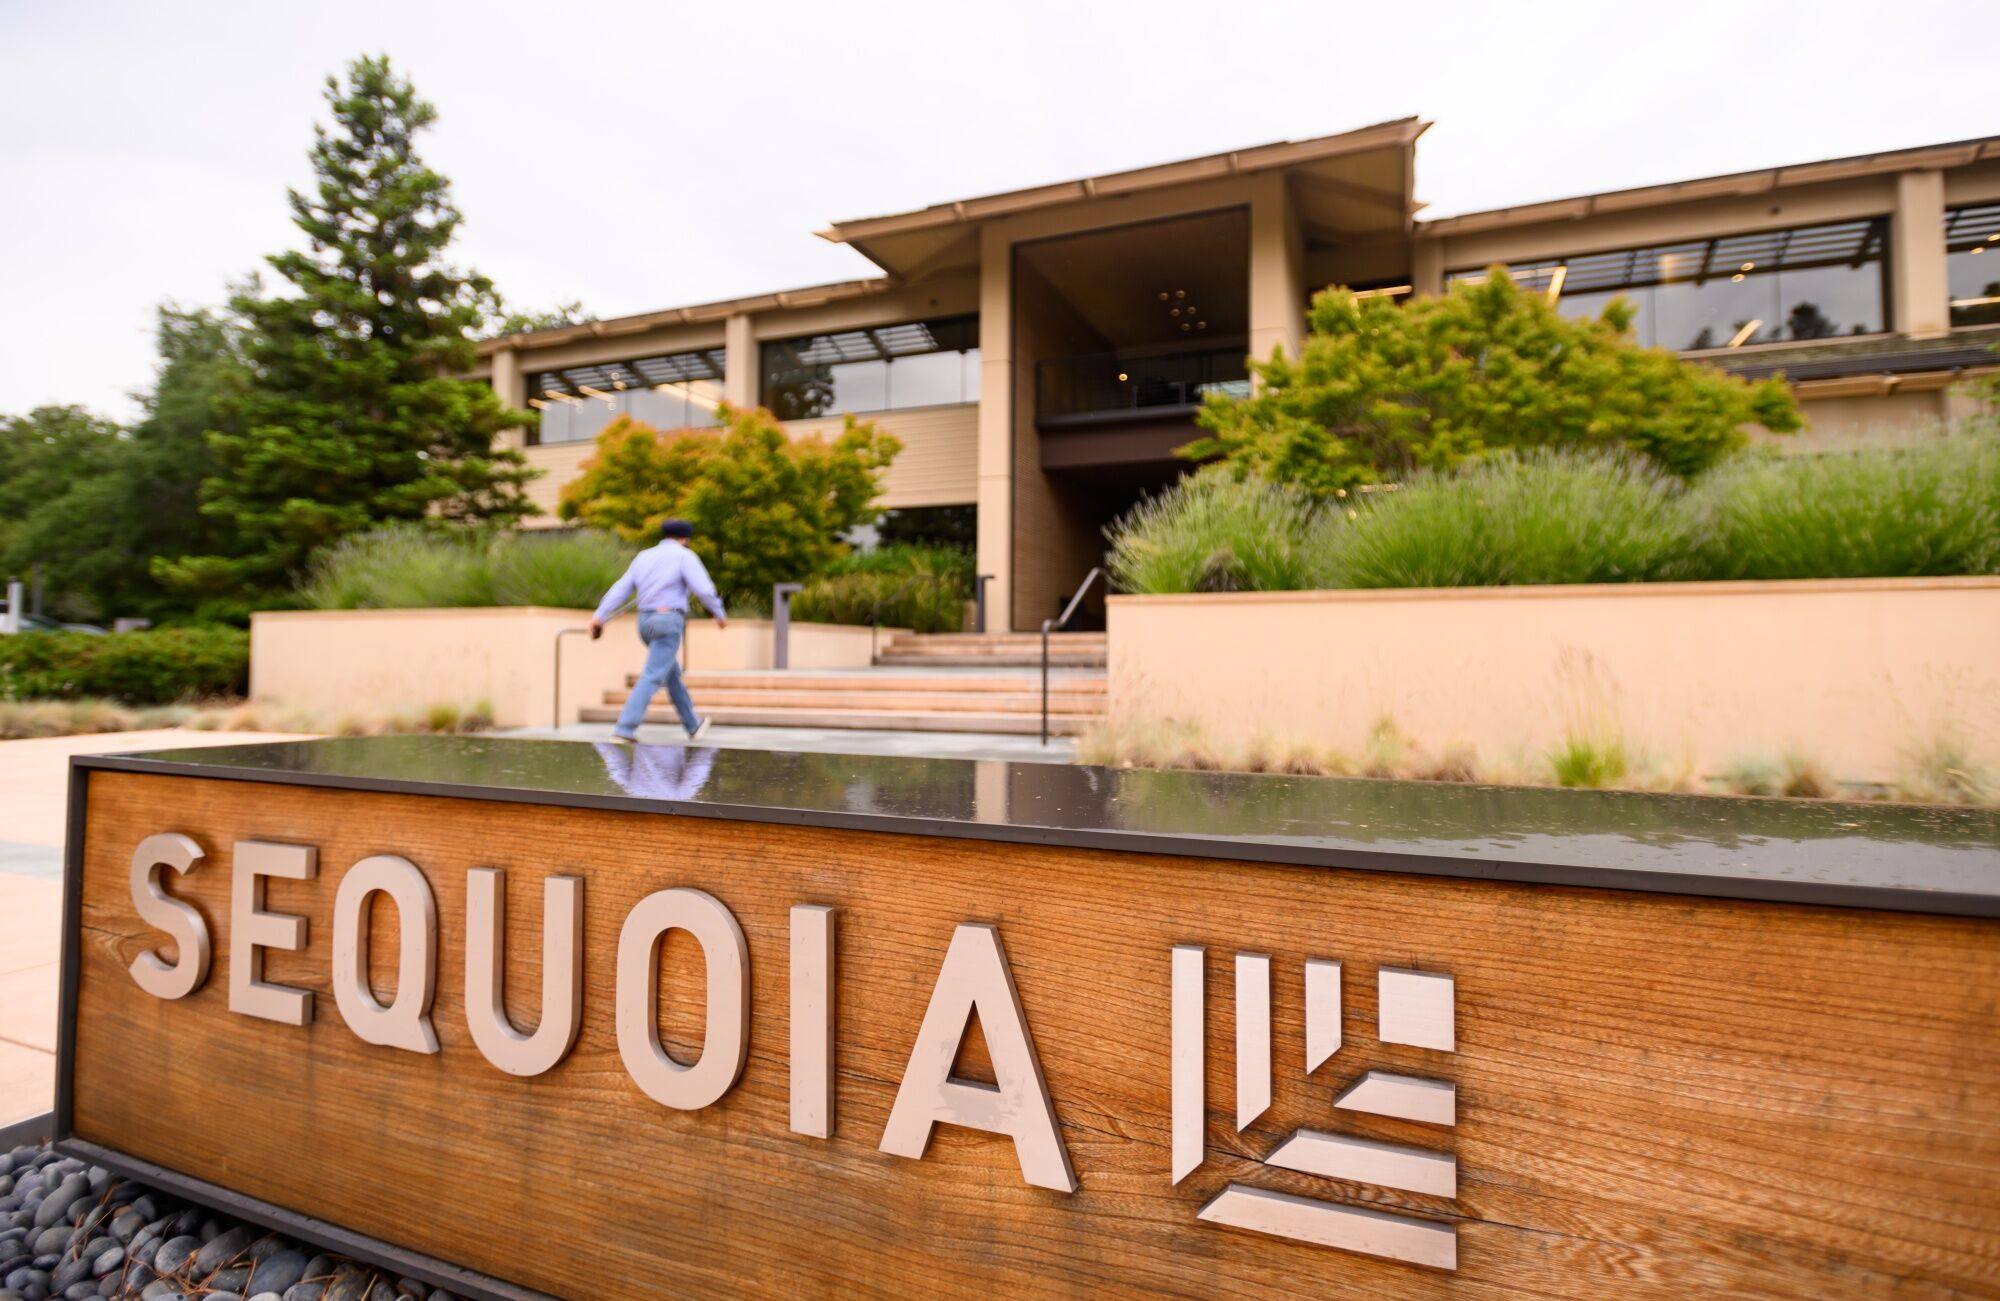 Sequoia Capital’s offices in Menlo Park, California, on June 6, 2023. Photo: Bloomberg